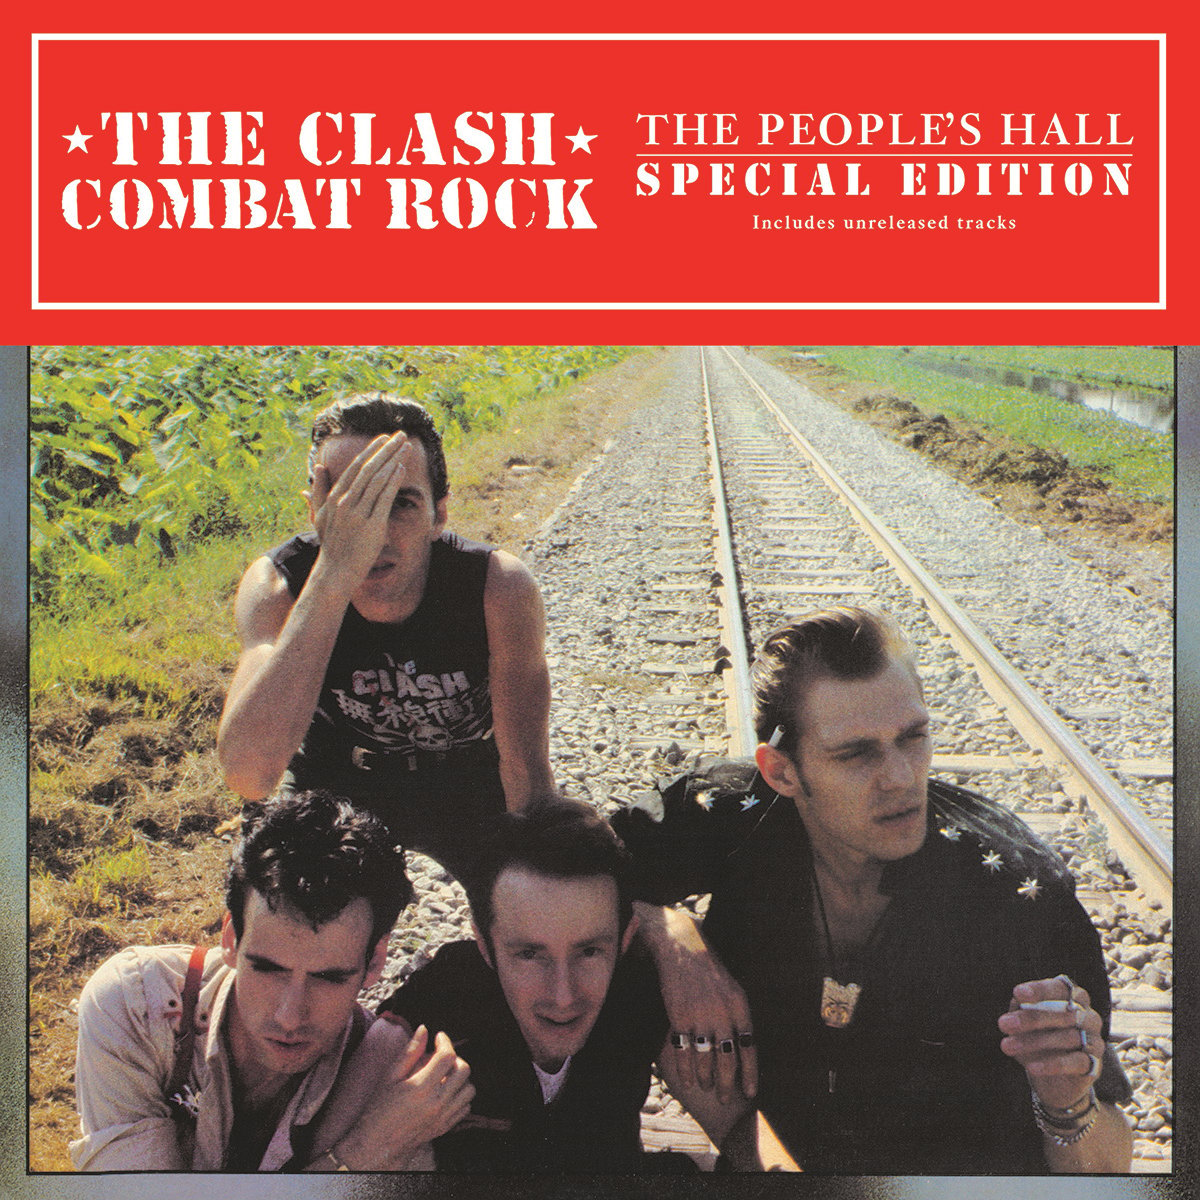 The Clash ‘Combat Rock / The People’s Hall’ A Special Edition Available From May 20th